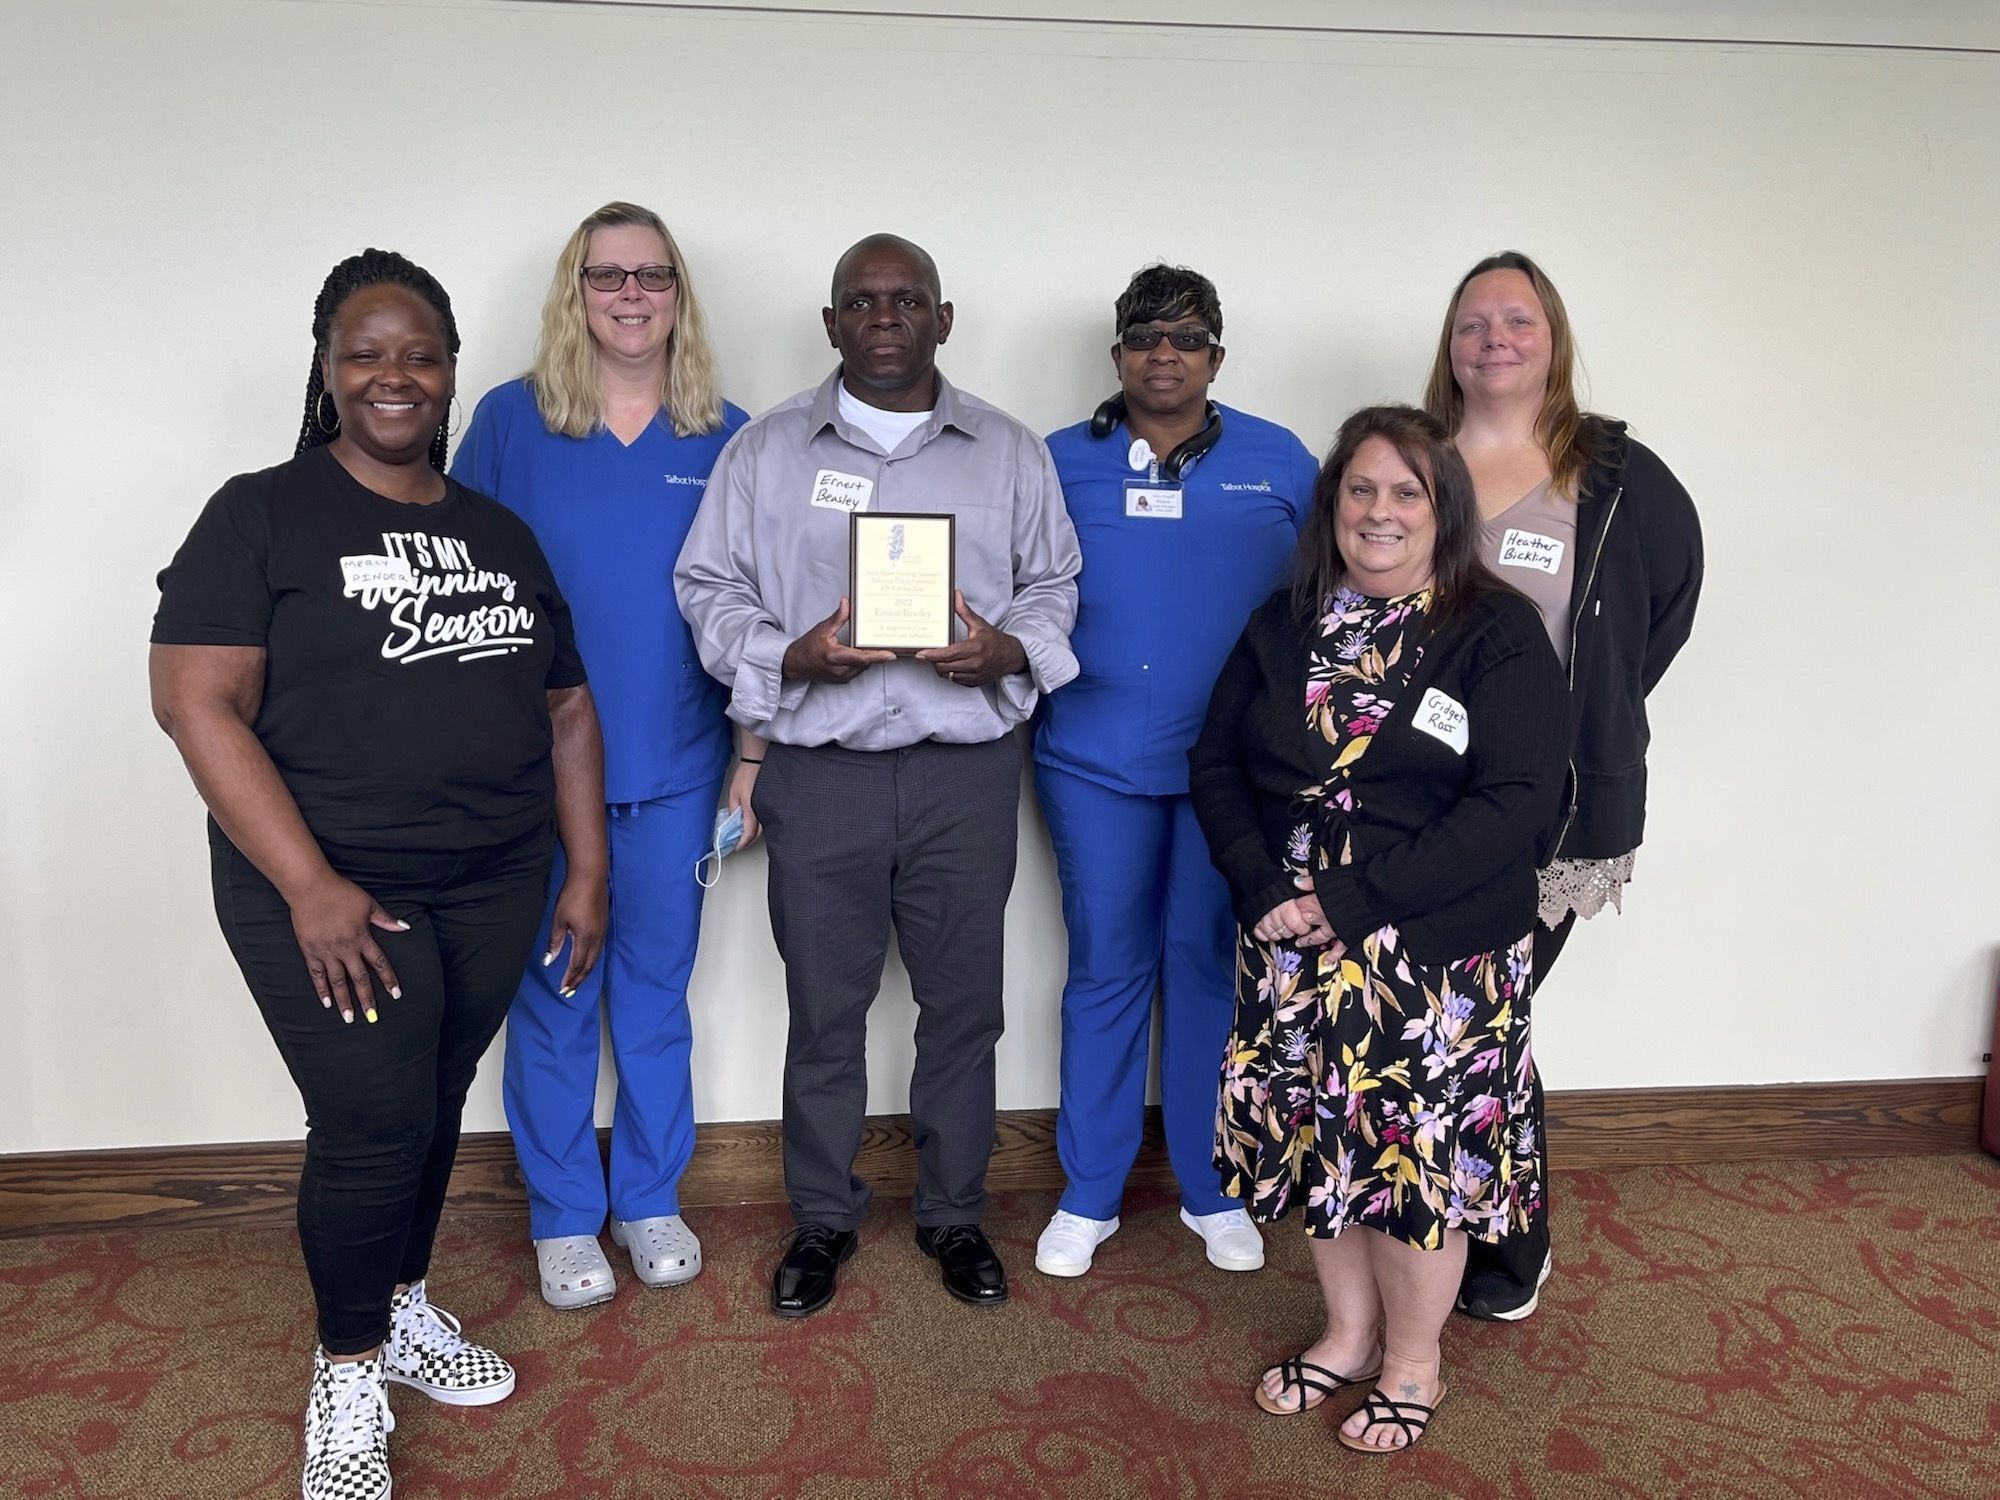 Talbot Hospice CNA, Ernest Beasley, Named CNA of the Year